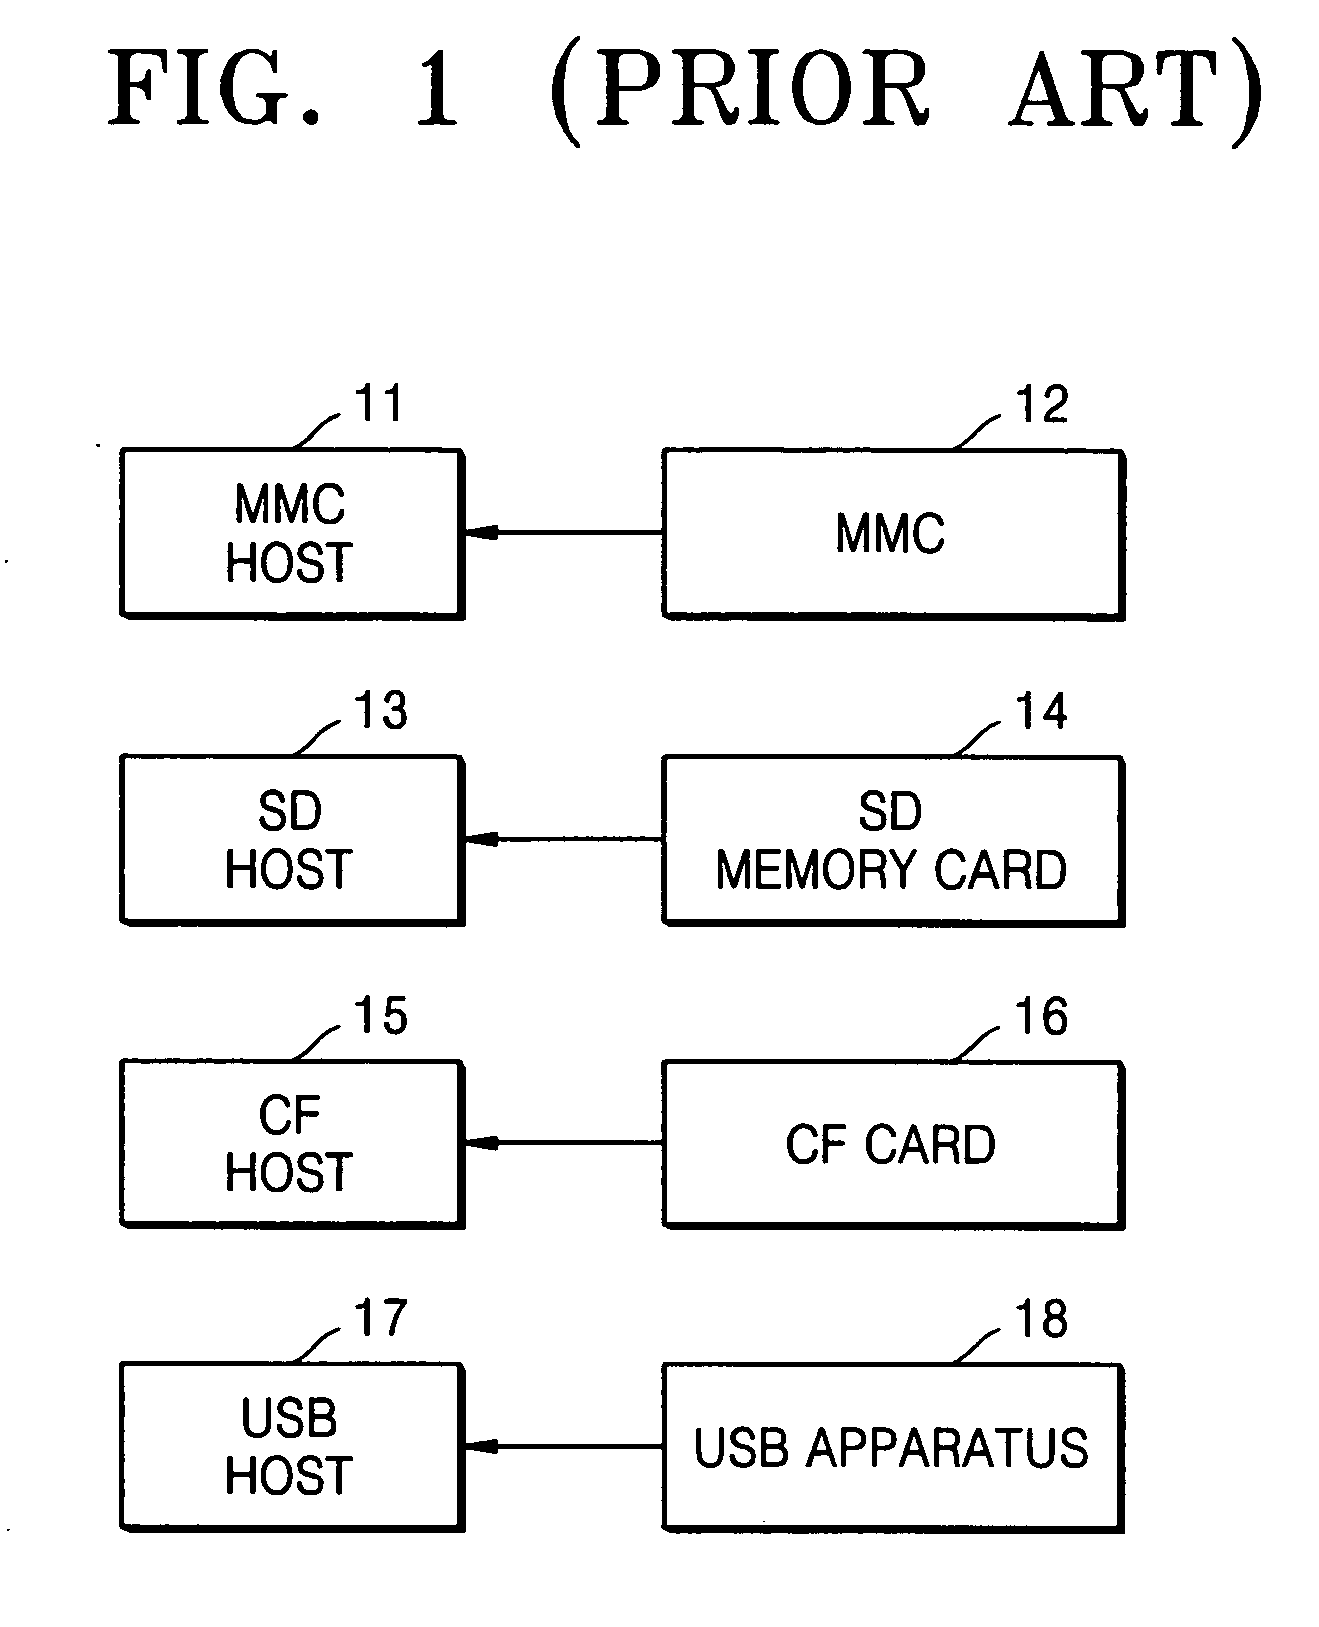 Multimedia/secure digital cards and adapters for interfacing to hosts and methods of operating